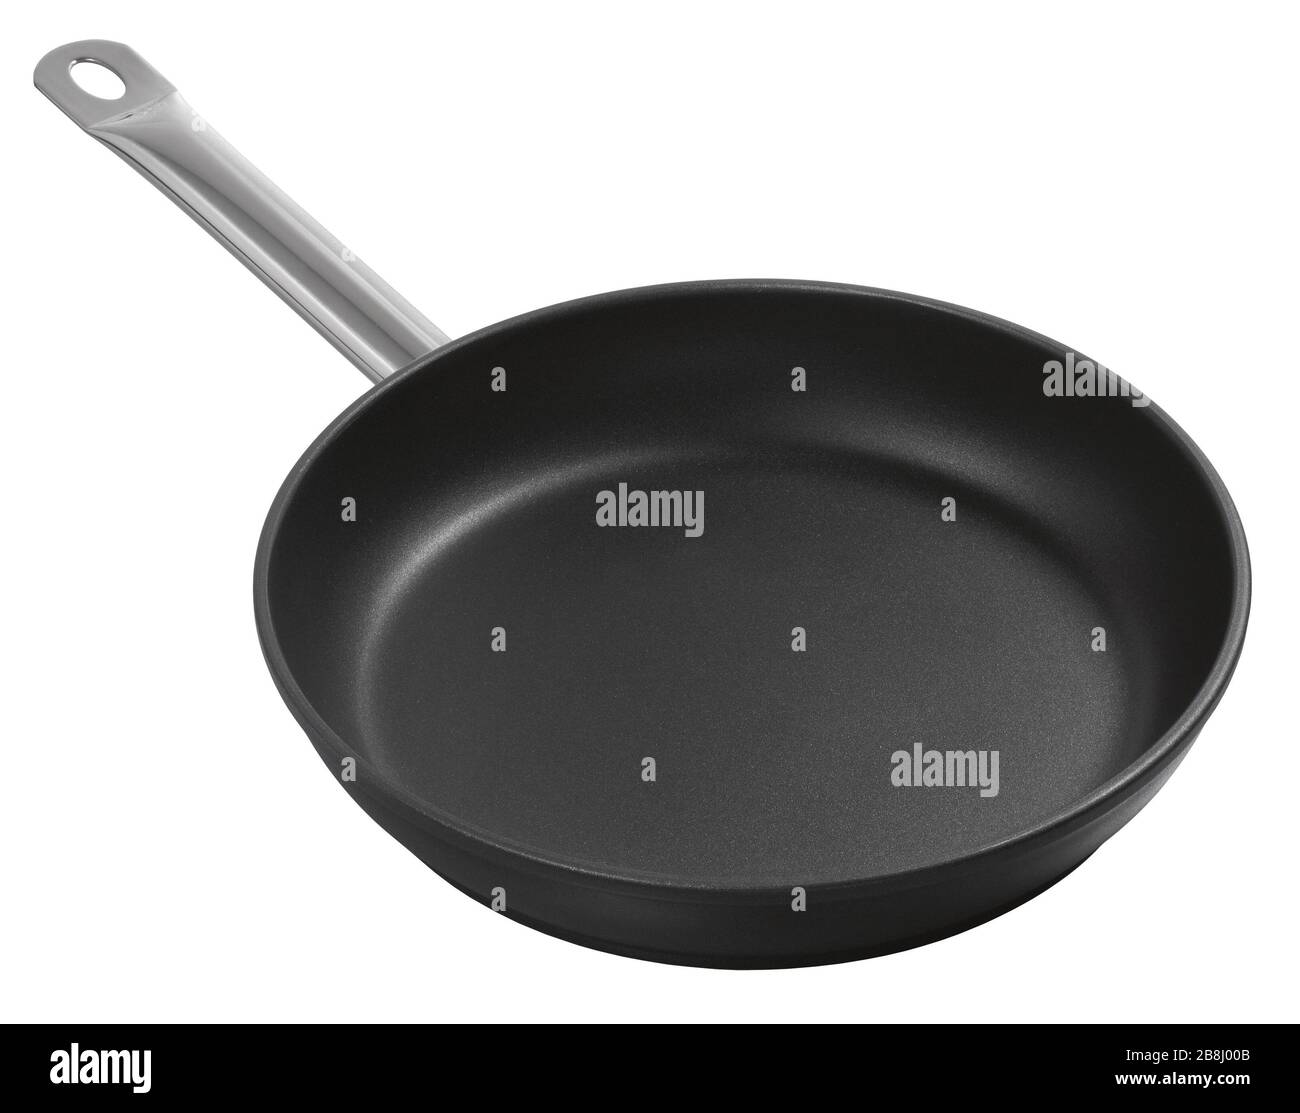 Large metal frying pan, image is taken over a white background Stock Photo  - Alamy